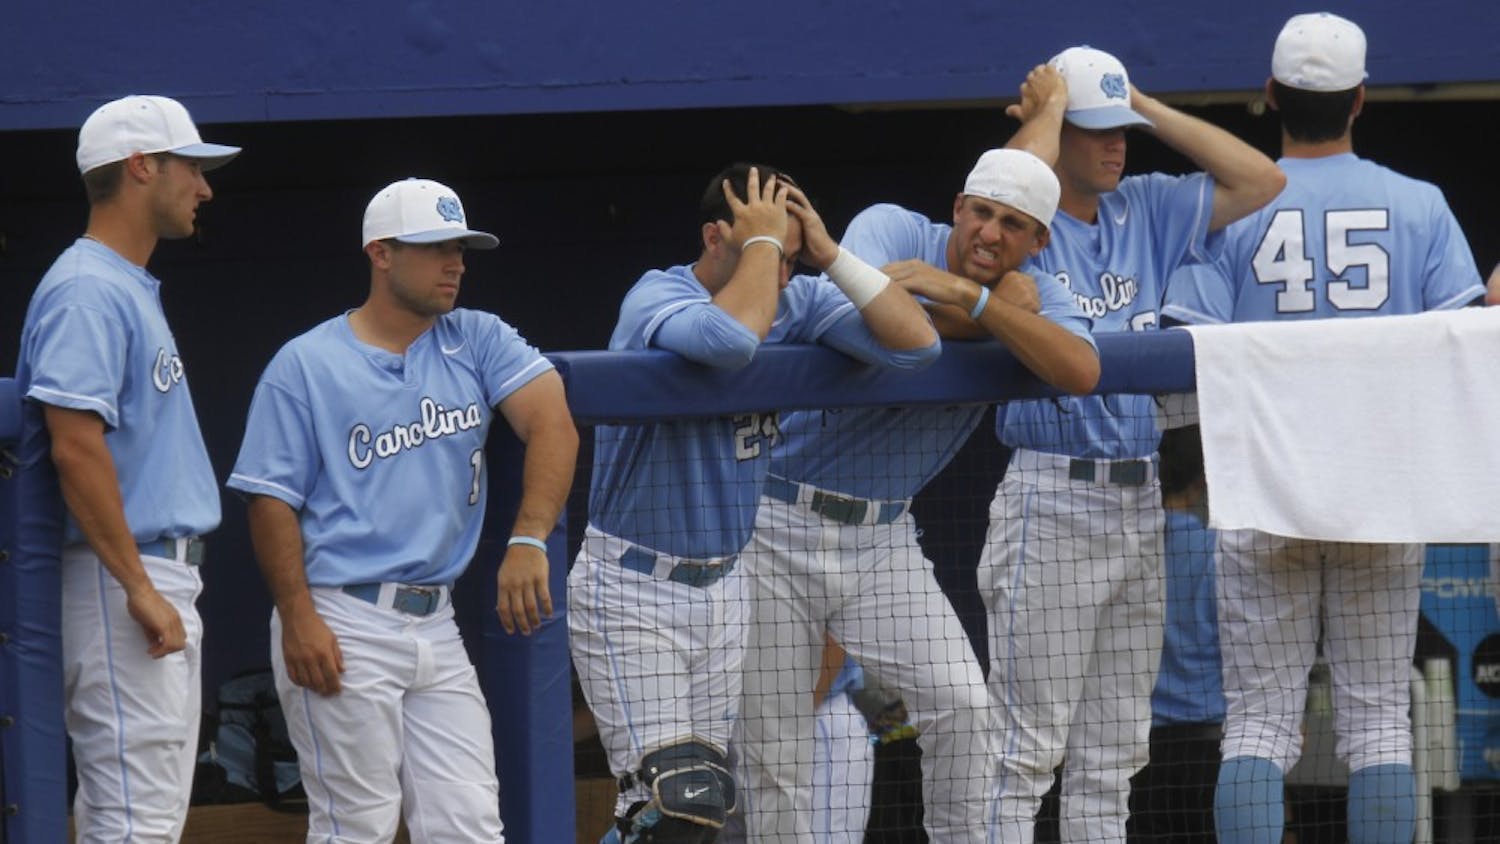 UNC lost to Long Beach State 12-5 in the Gainesville regional of the NCAA tournament. The loss ends the Tar Heels' season. 